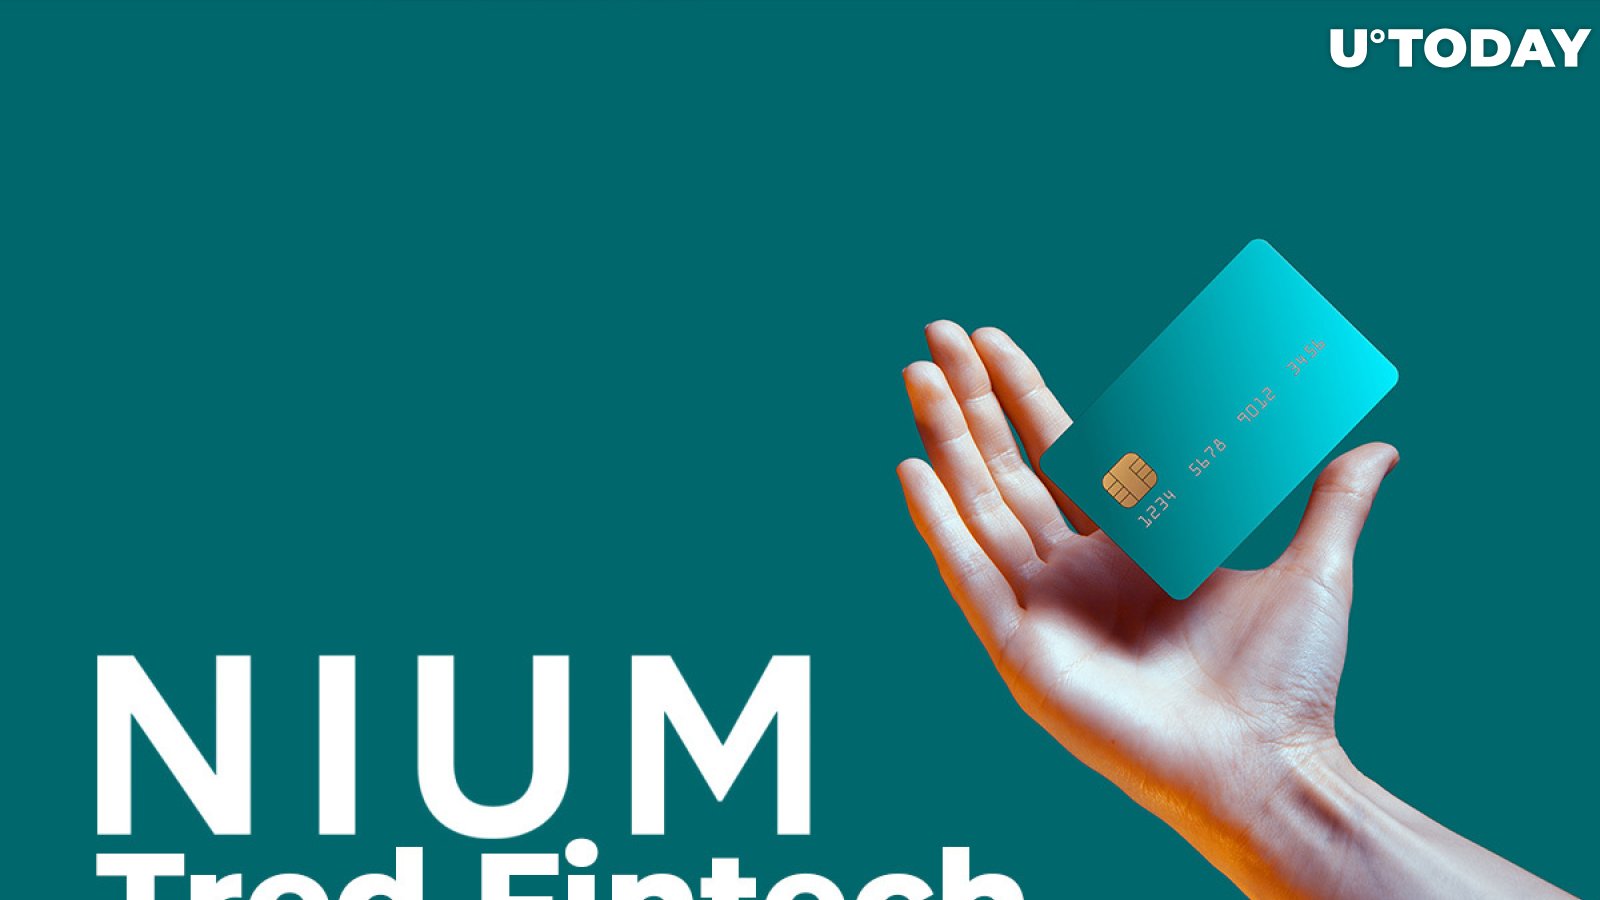 Ripple Client Nium Partners with Tred Fintech to Issue UK’s First Green Debit Card